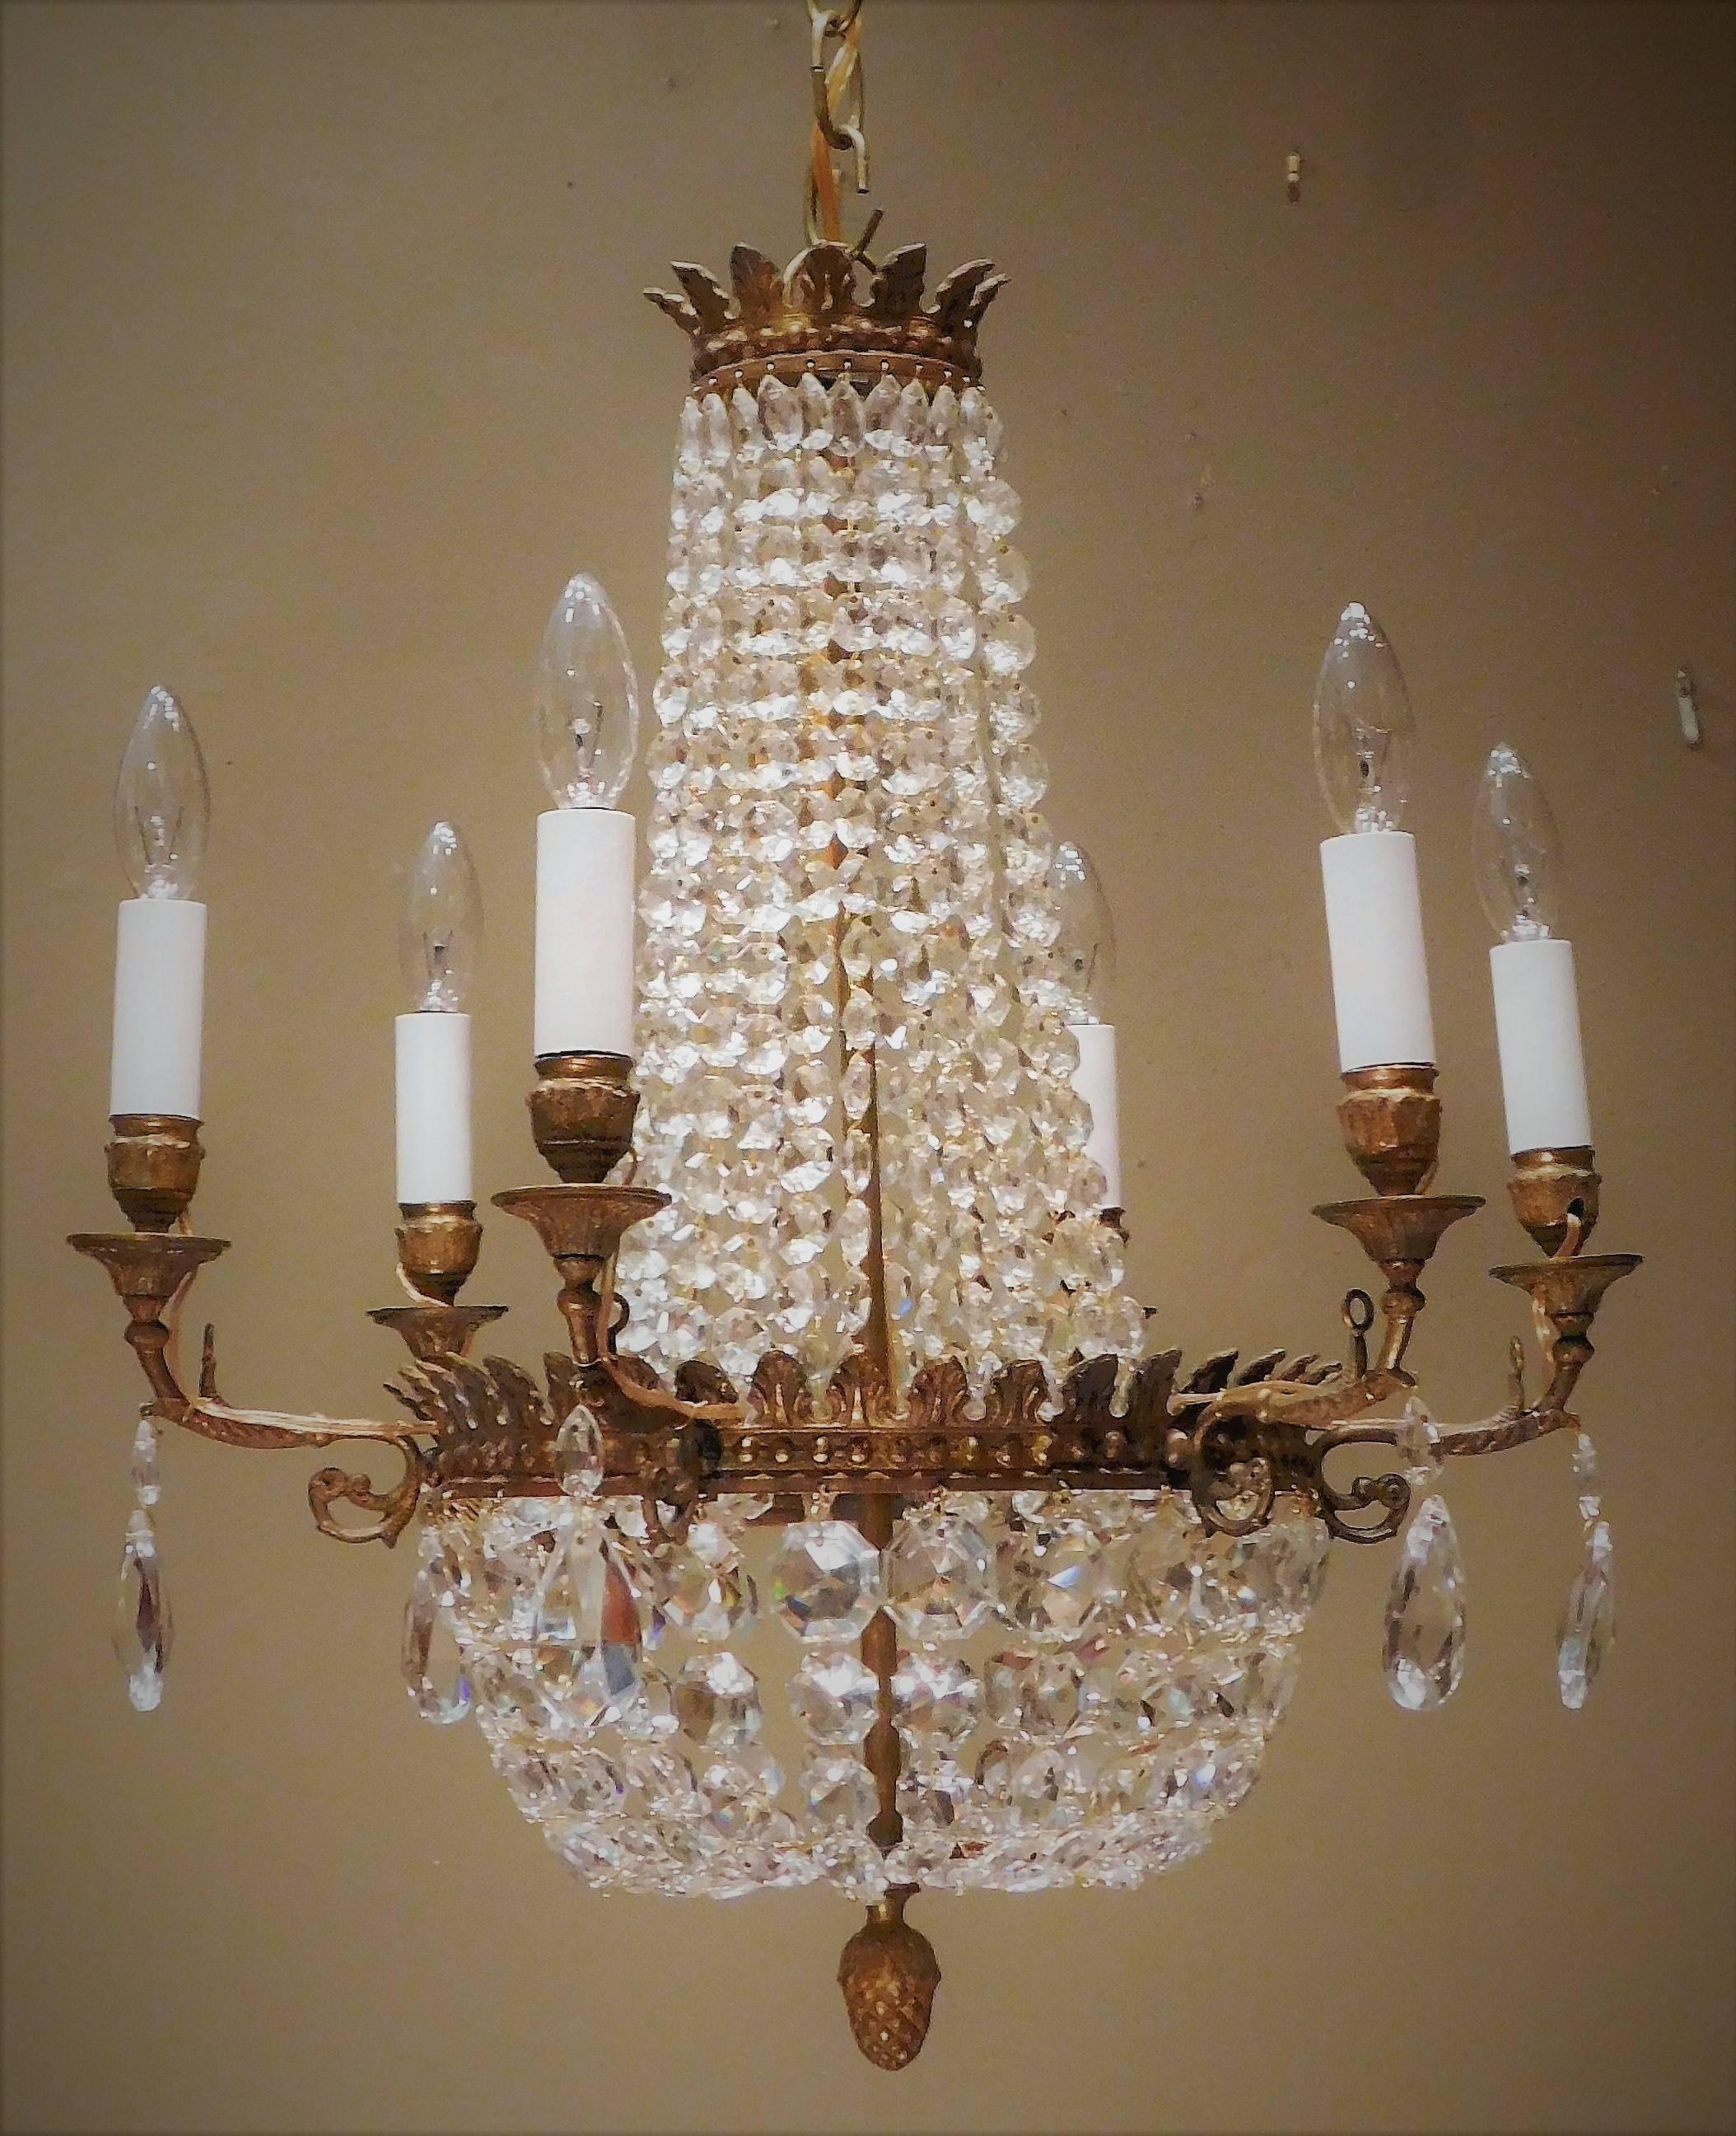 Pair of hand cast gilt bronze Empire style chandeliers with French lead crystal prisms. Ceiling cap, hanging hardware and 1 foot of chain included in the price.